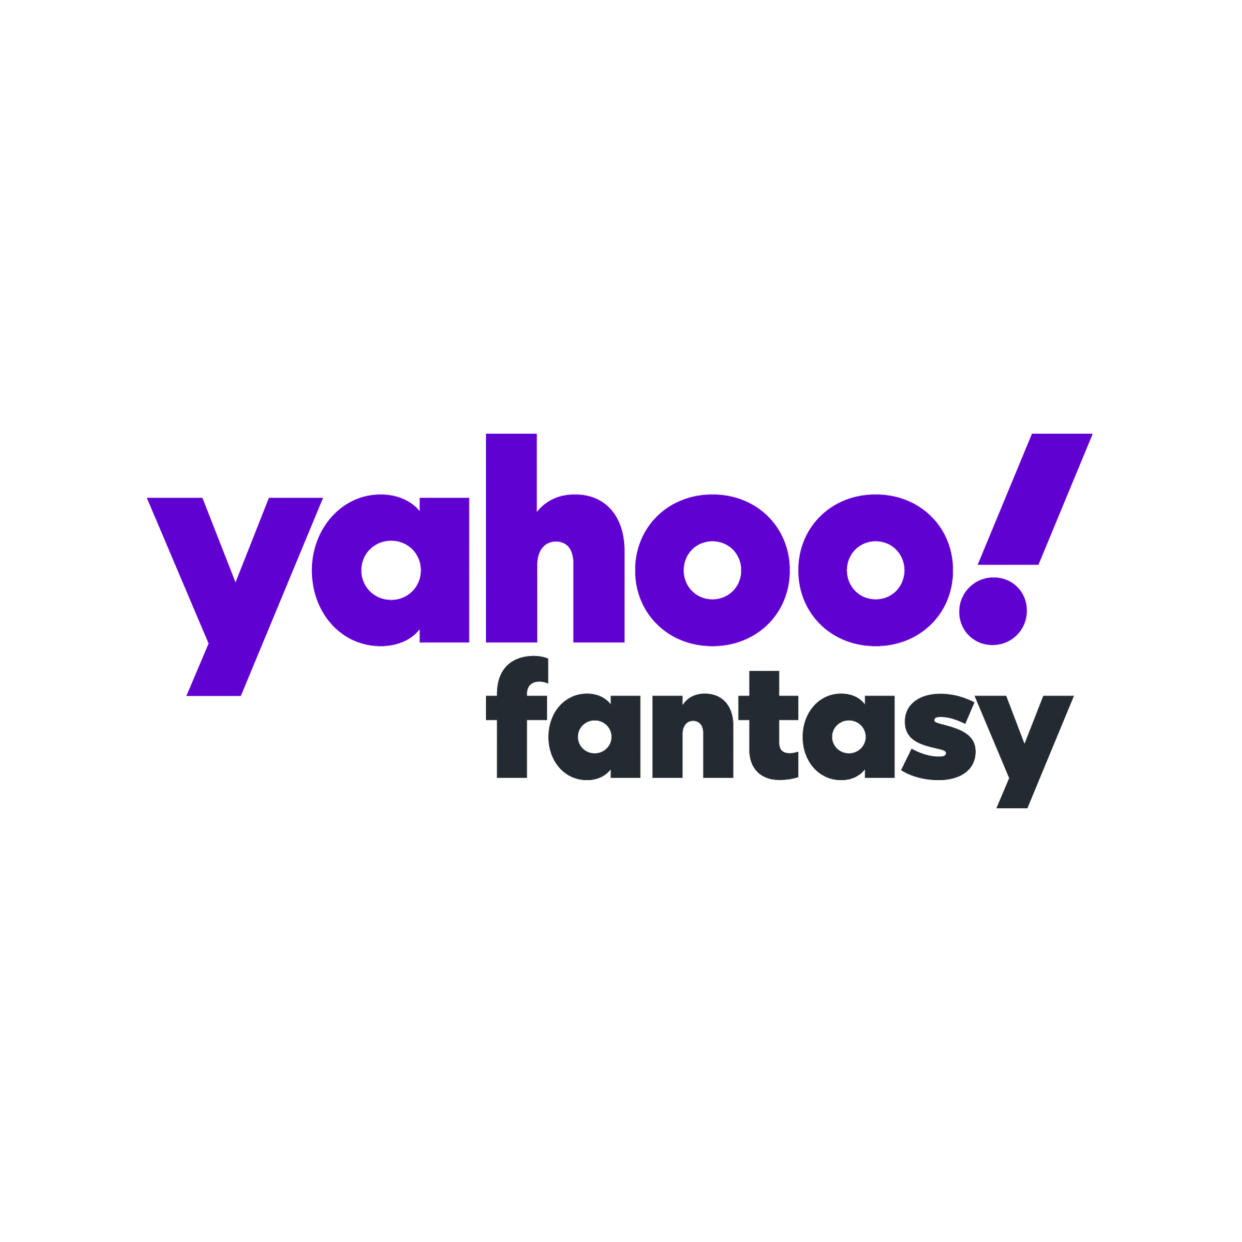 Get ready for the latest new exciting feature from Yahoo Fantasy, Live Activities!